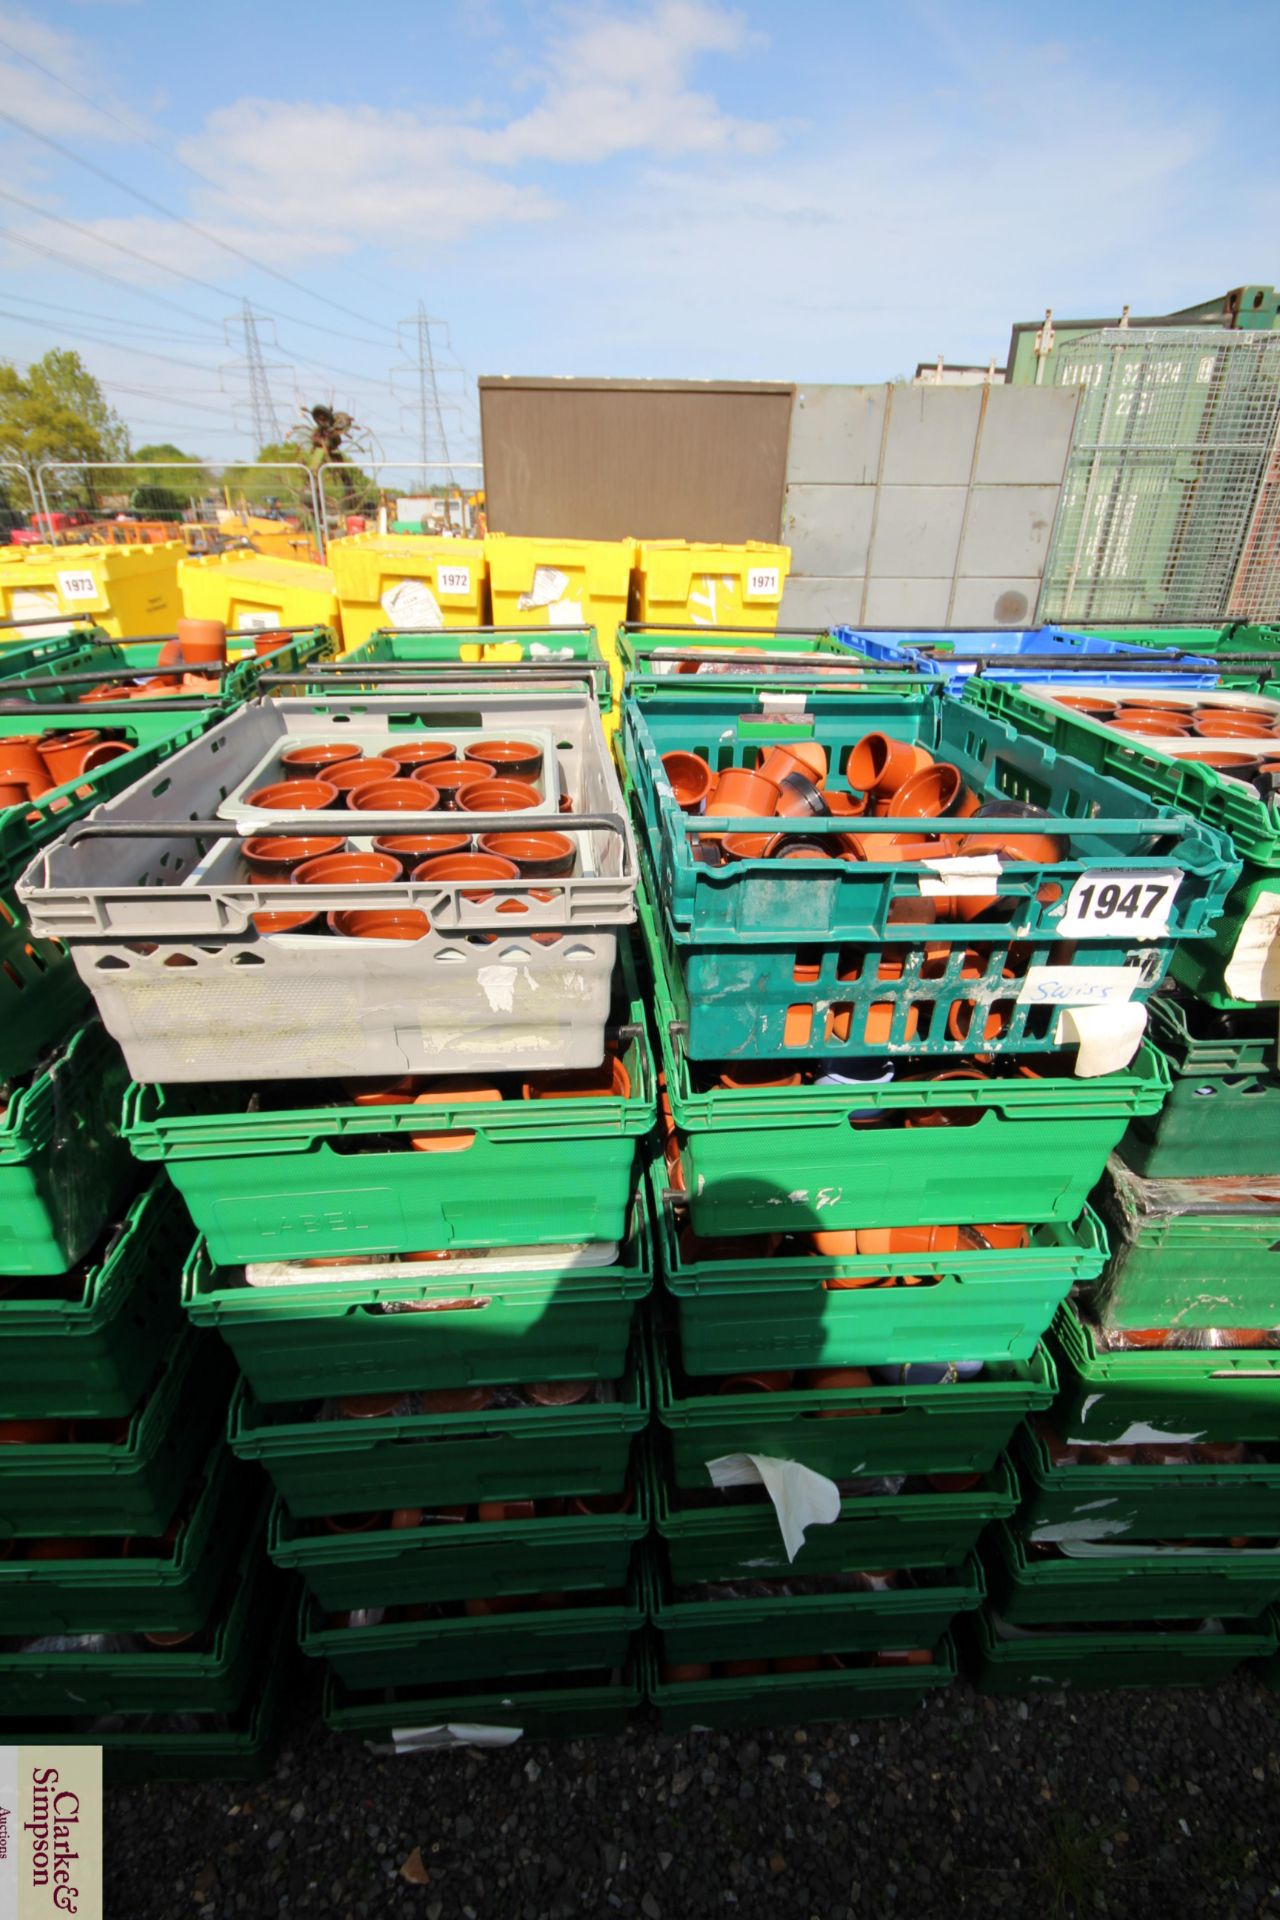 14x stacking vegetable crates. Containing a large